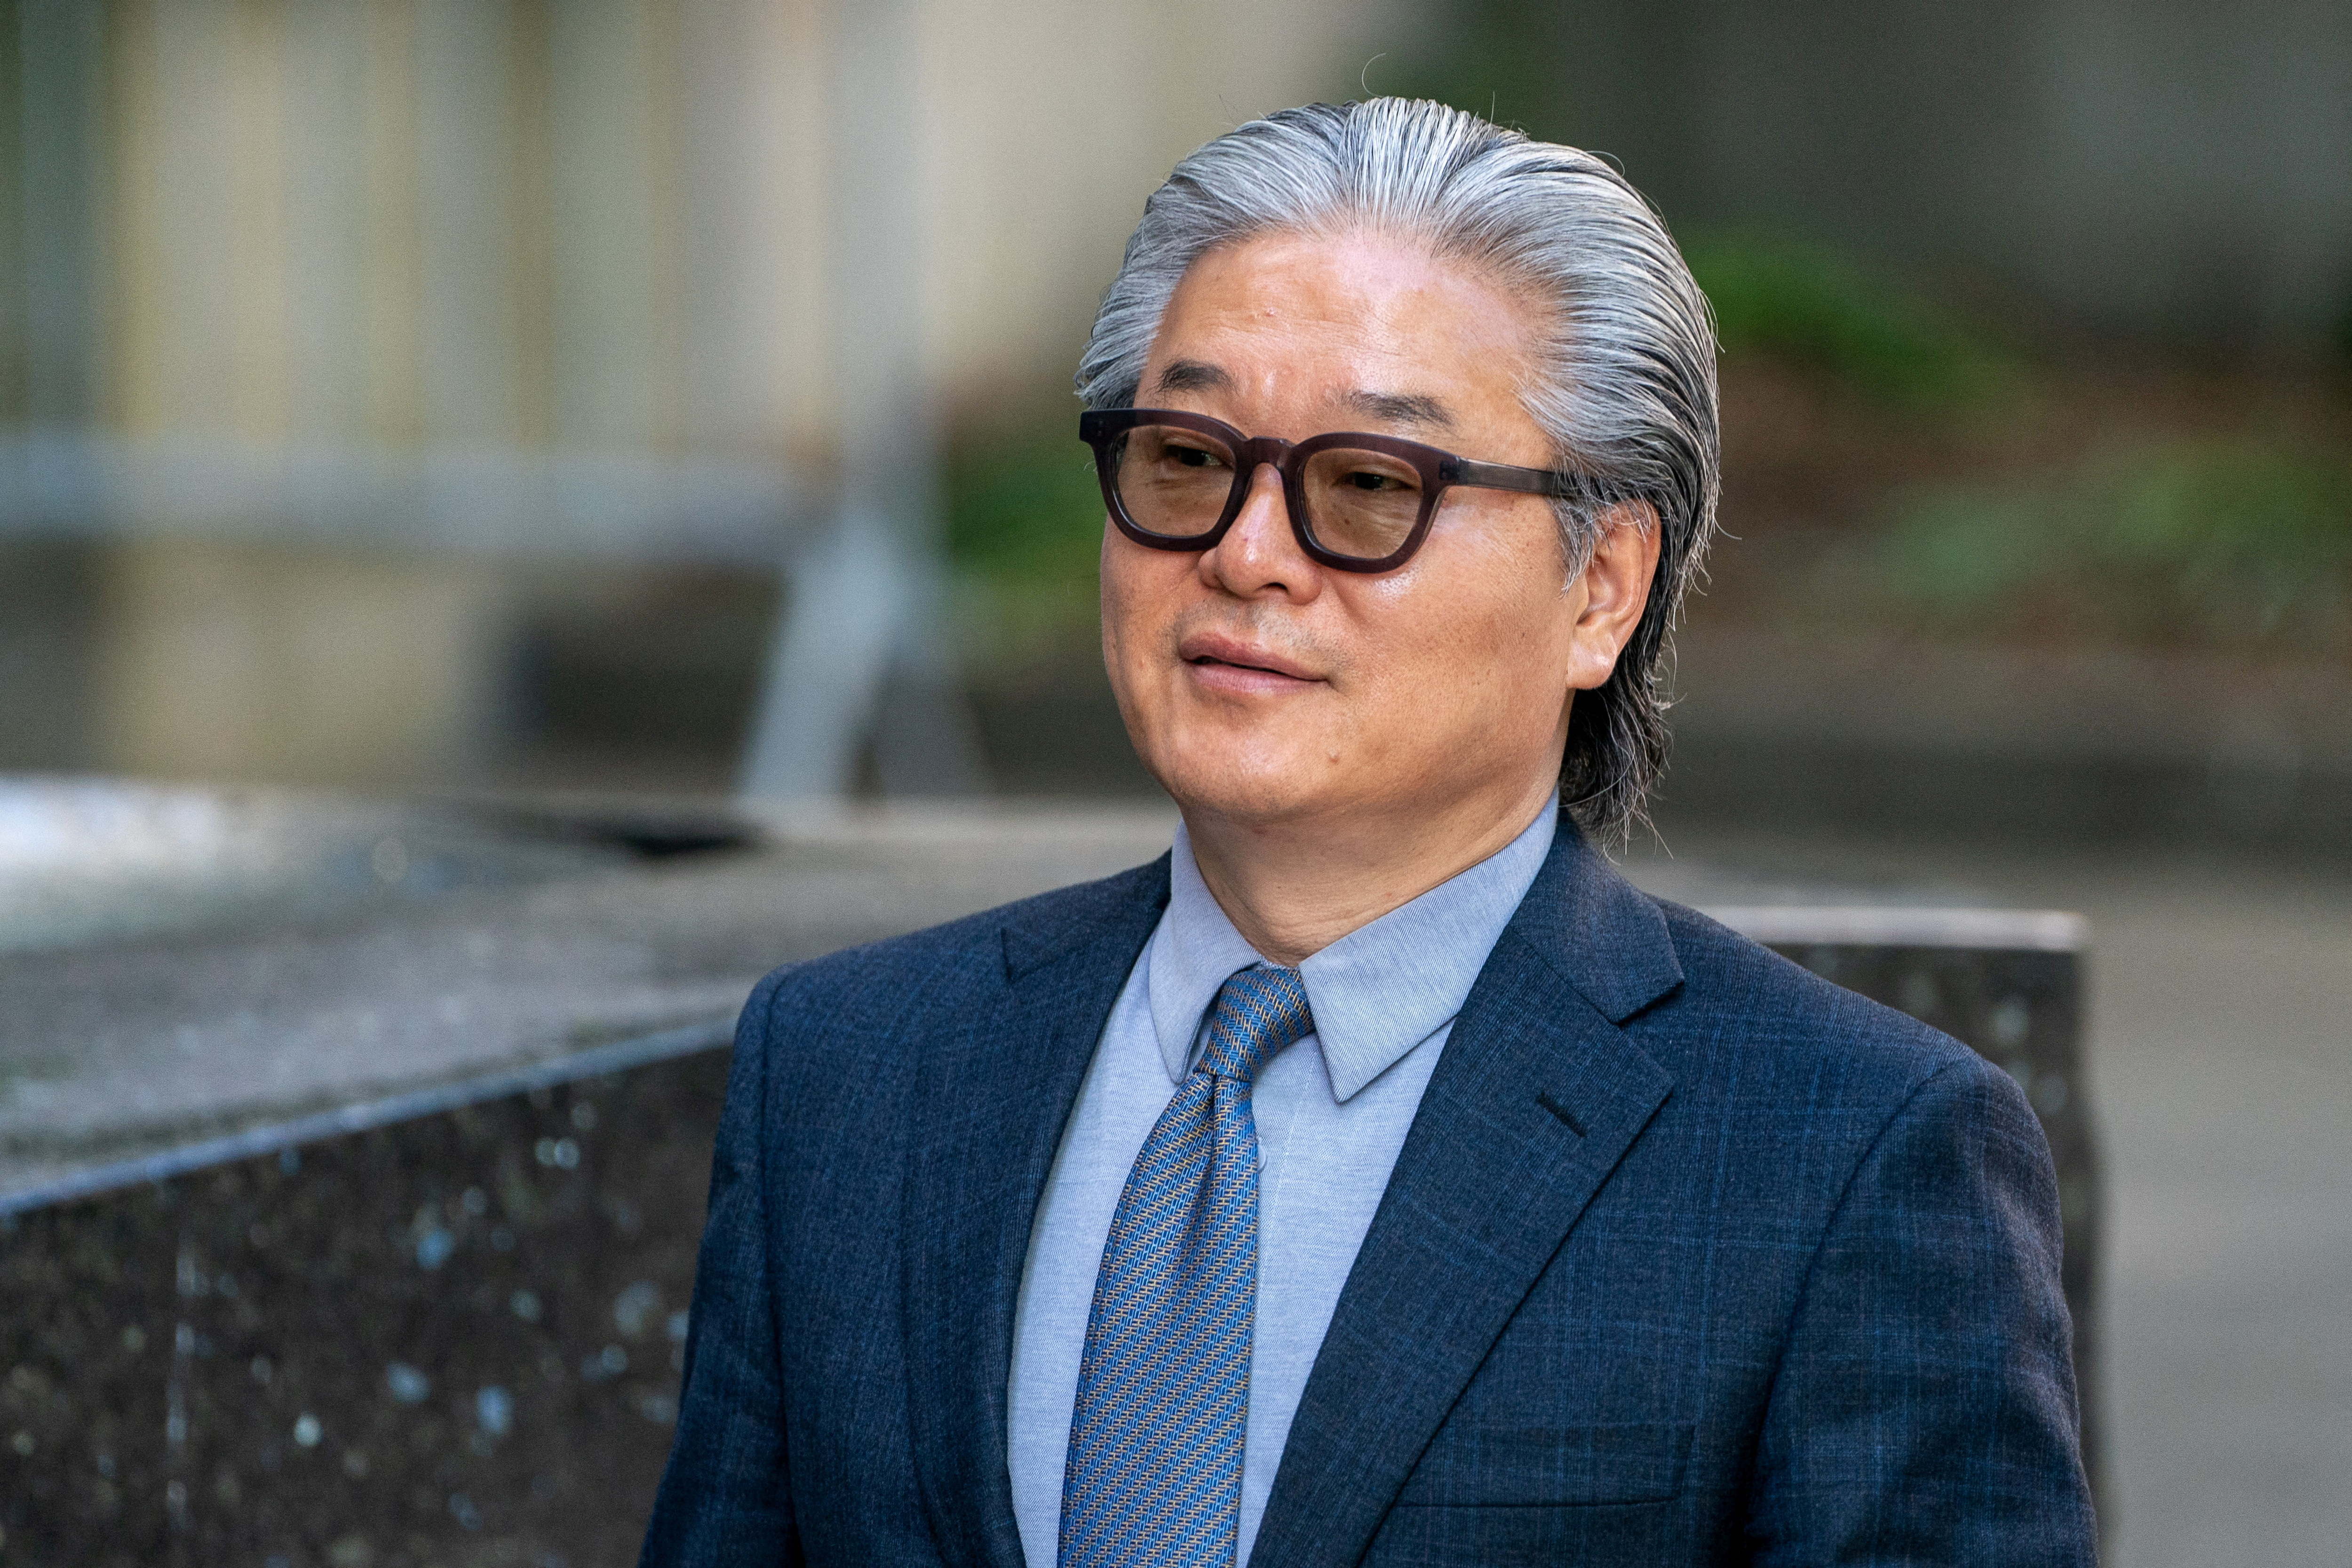 Sung Kook 'Bill' Hwang, the founder and head of the private investment firm Archegos, arrives at federal court in New York